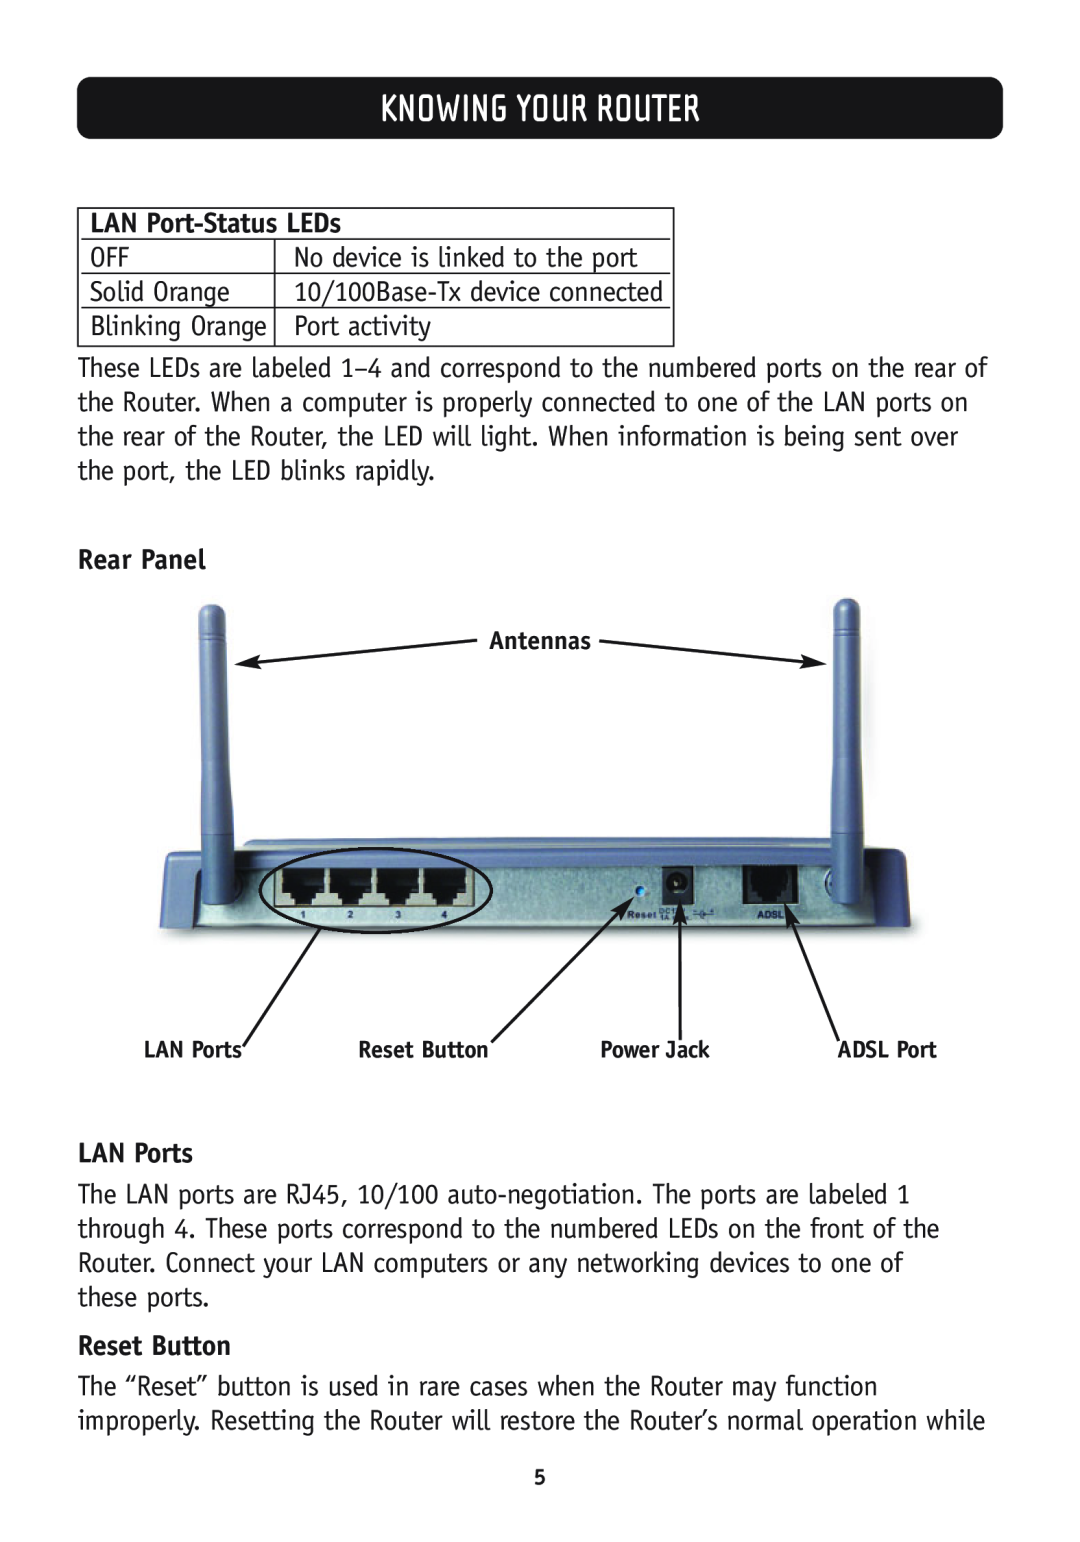 Belkin F5D7630-4B, F5D7630-4A user manual LAN Port-Status LEDs, Rear Panel, LAN Ports, Reset Button, Knowing Your Router 